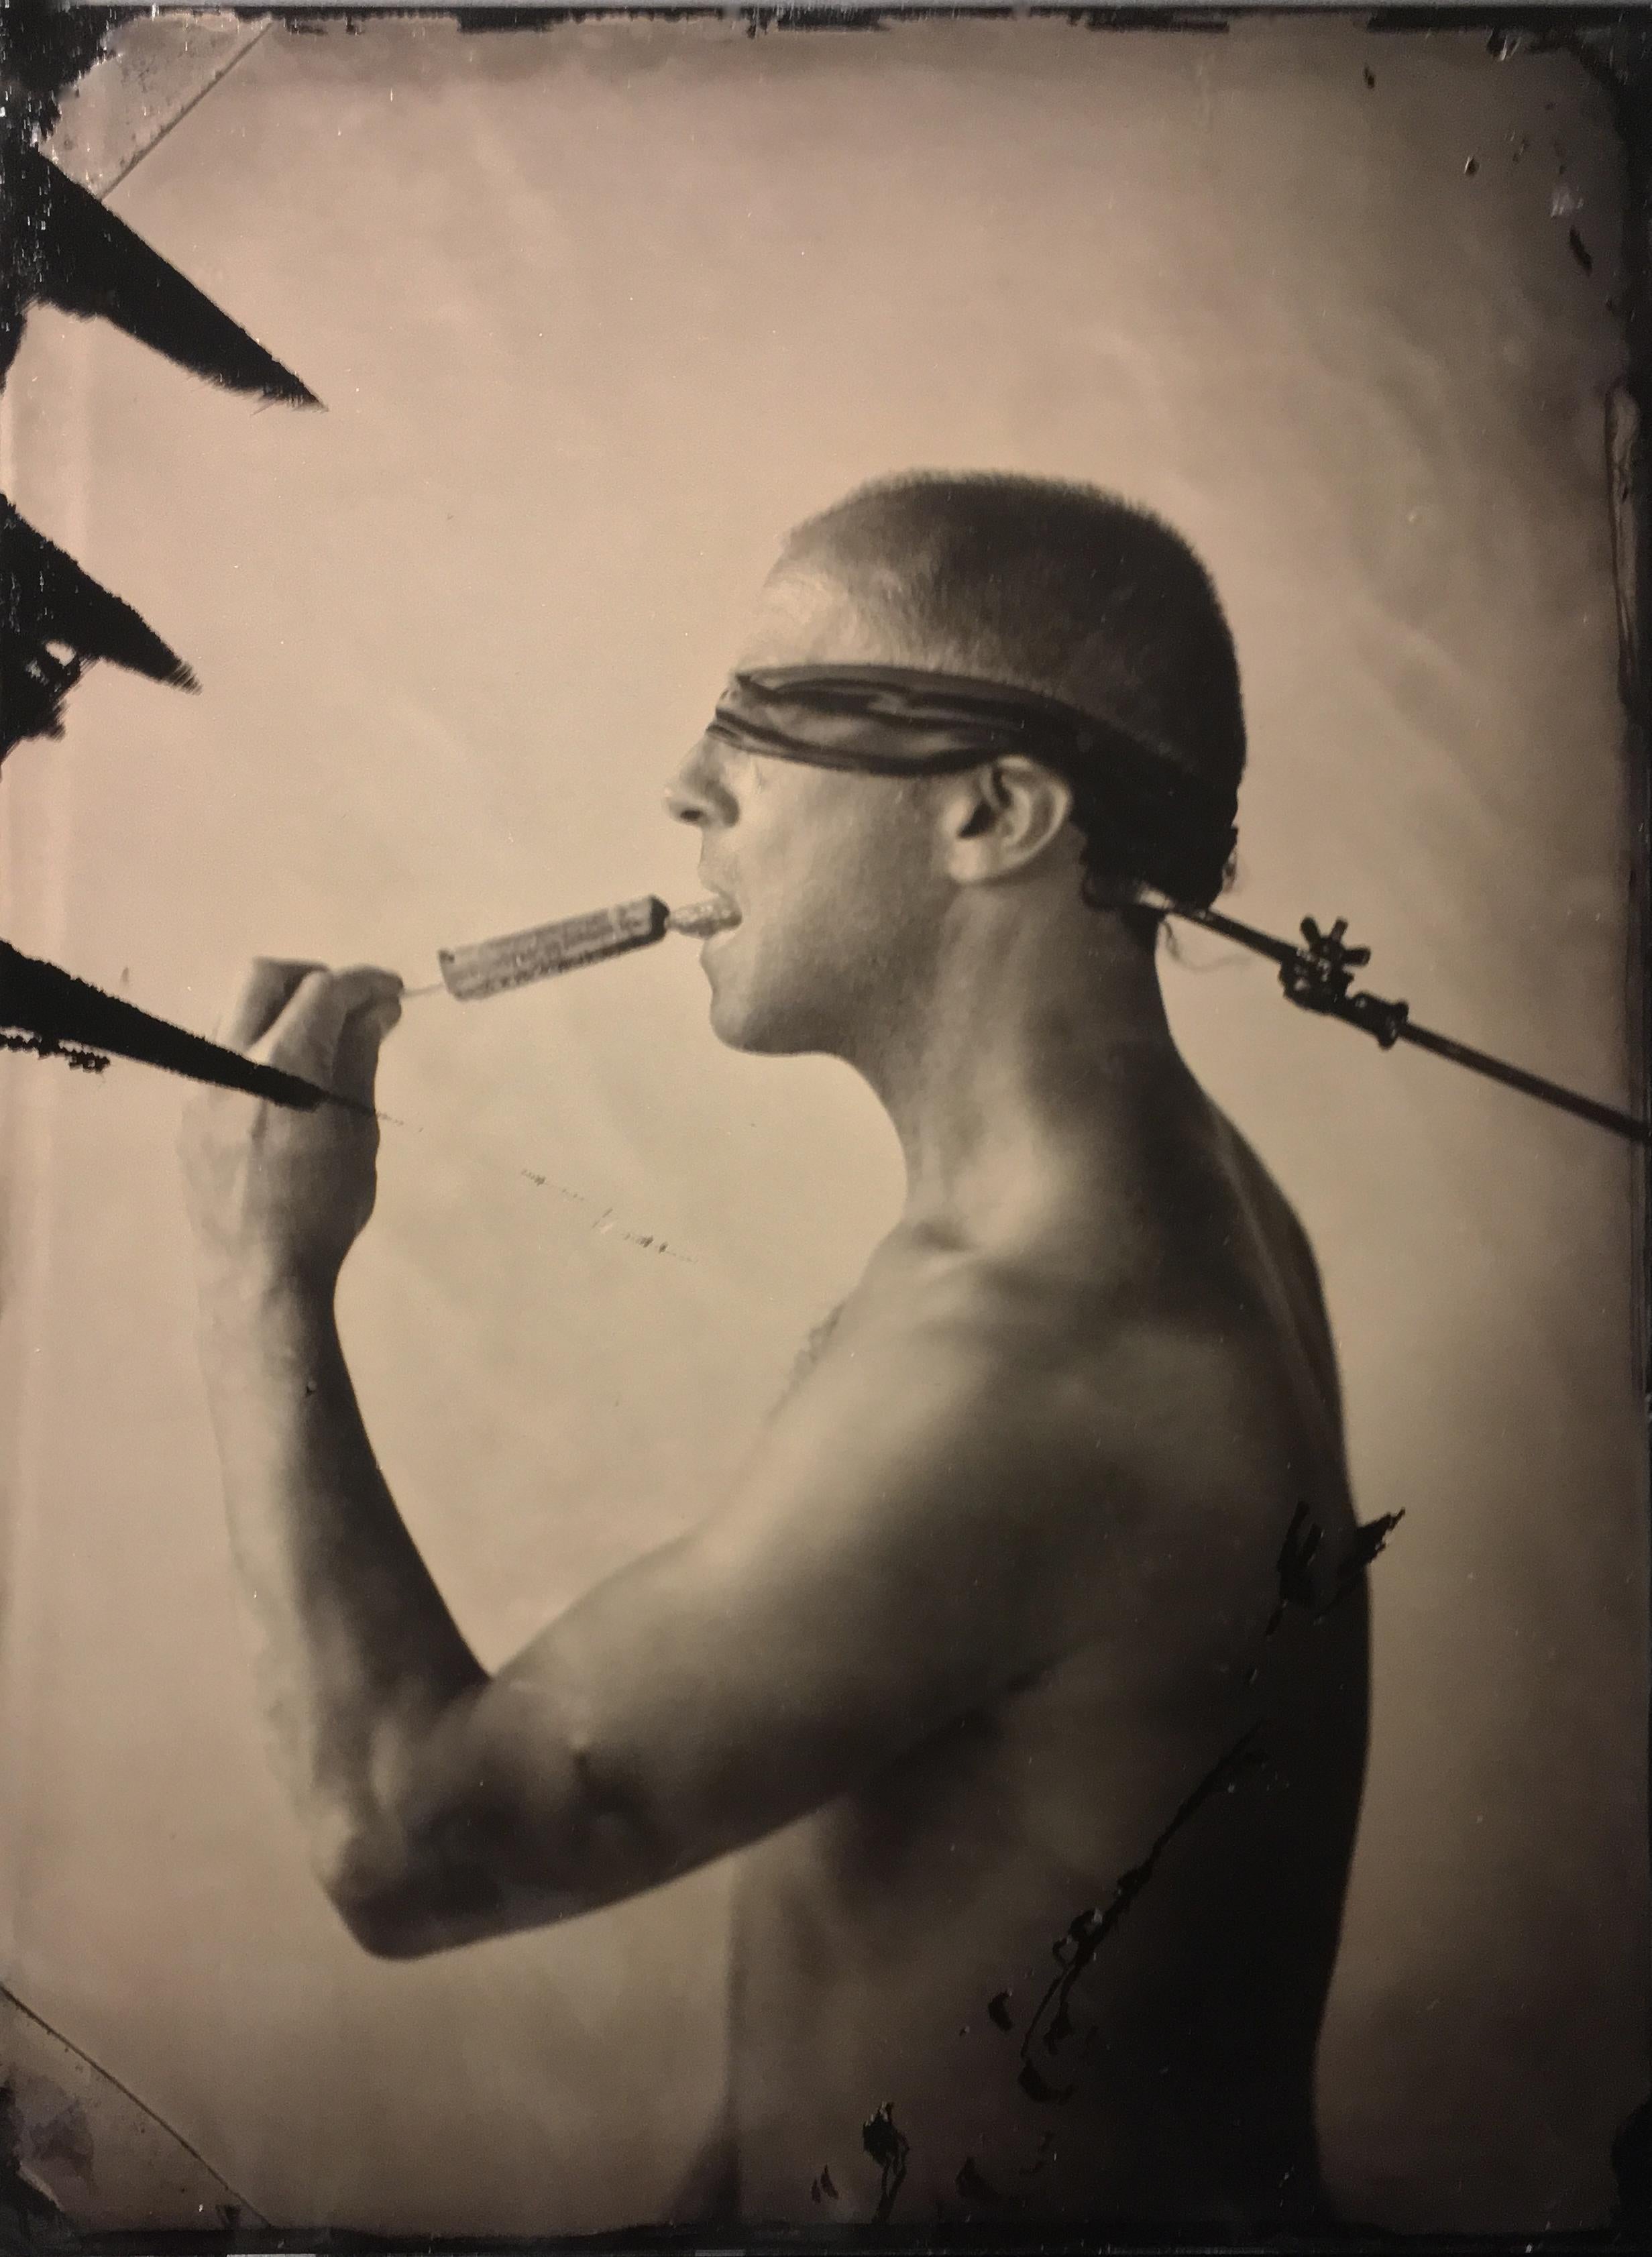 Linguist (Salacious Tin Type Photo of Male Nude Licking an Ice Pop, blindfolded)